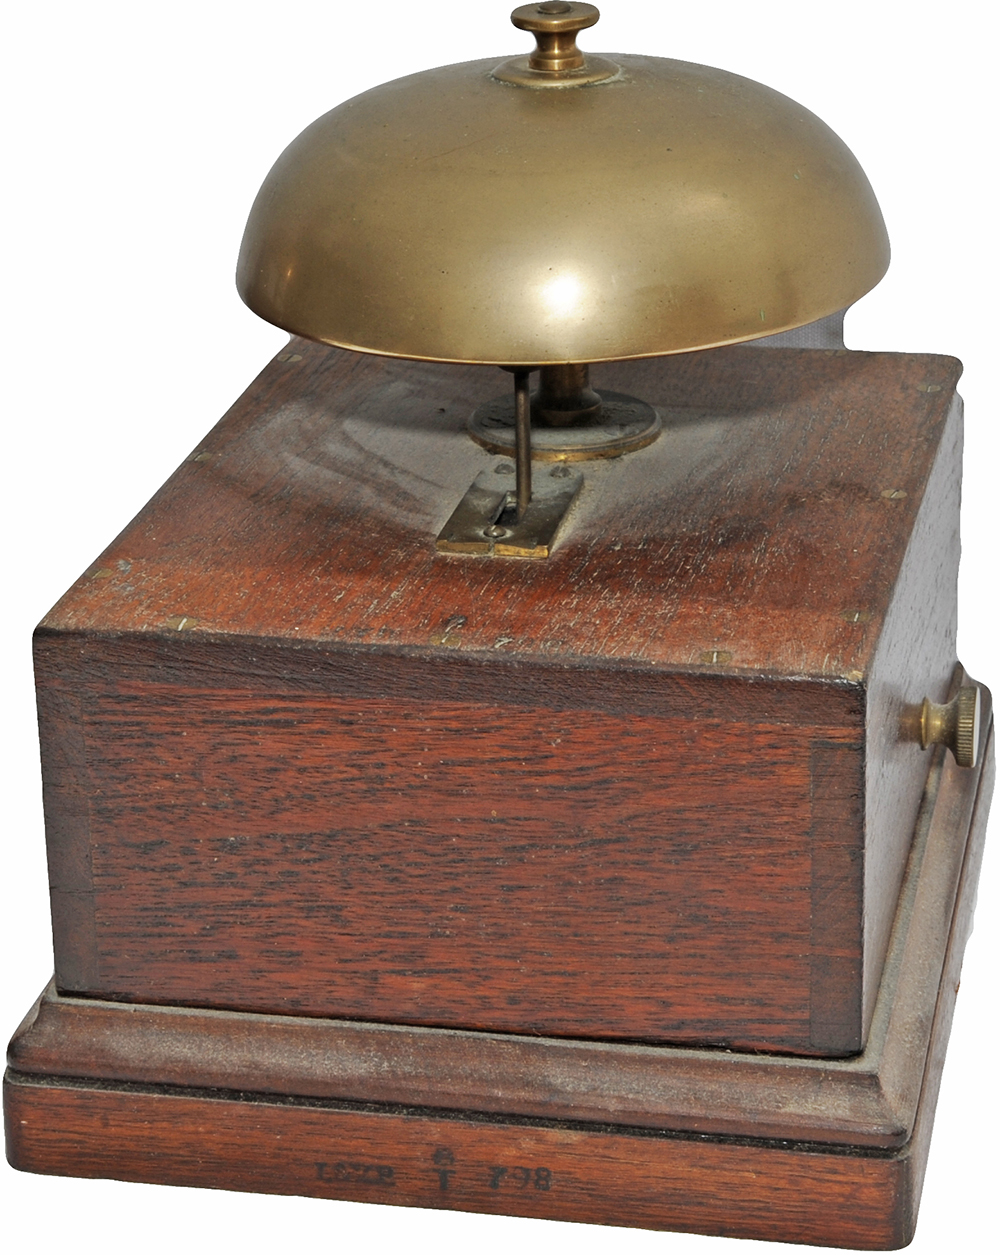 L&YR mahogany cased Block Bell. The case and base are stamped `L&YR 798` and the underside is